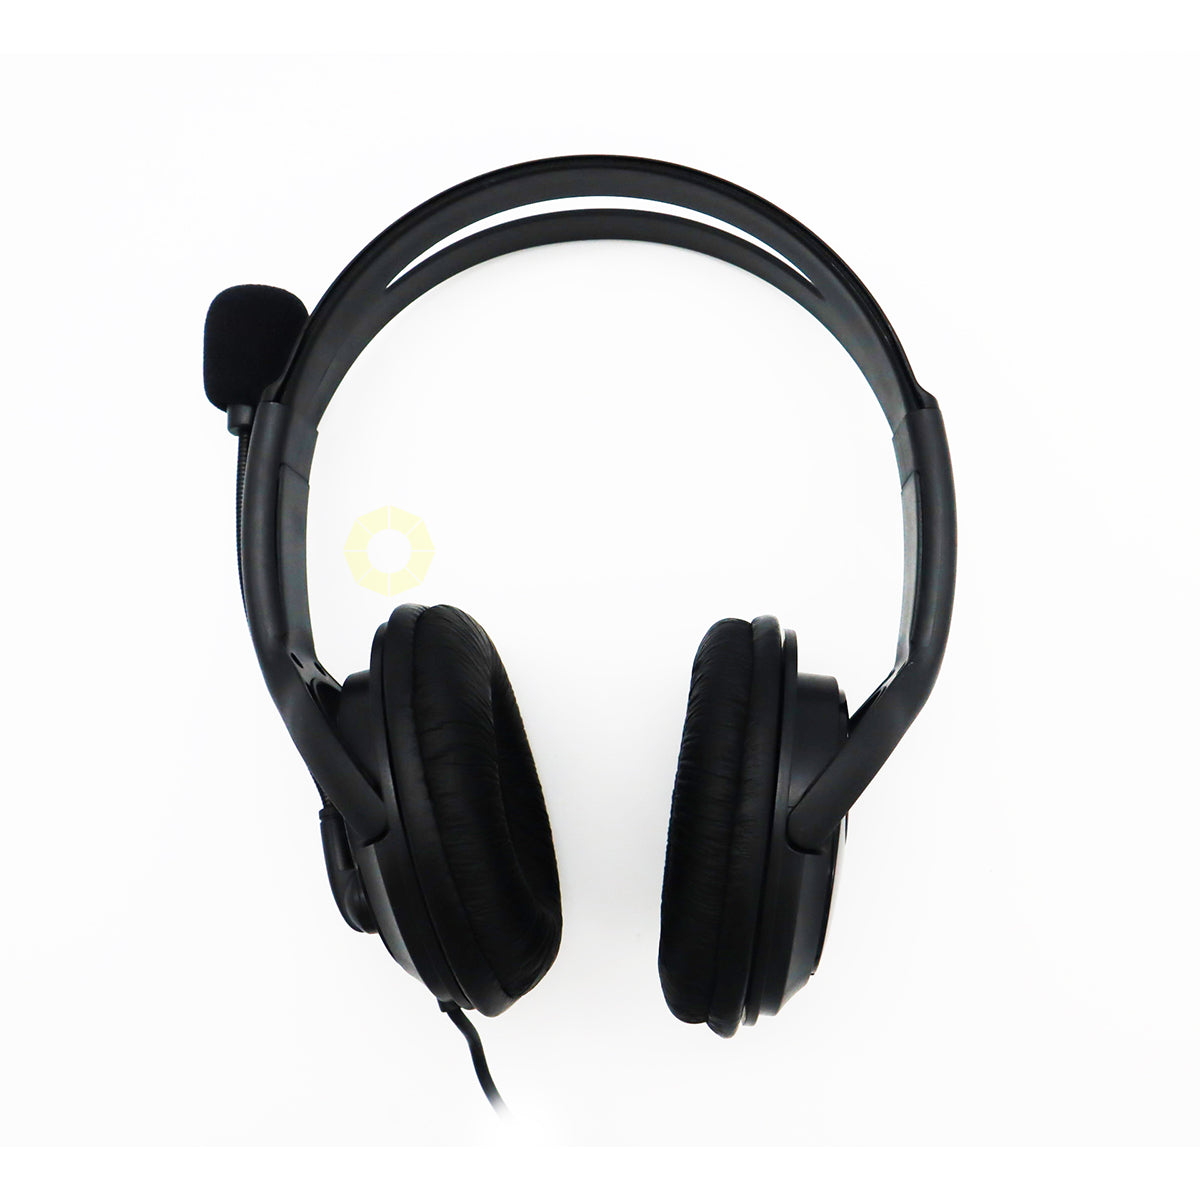 A1TECH AAH-005S SINGLE 4 PIN JACK HEADSET WITH MICROPHONE & CONTROLLER